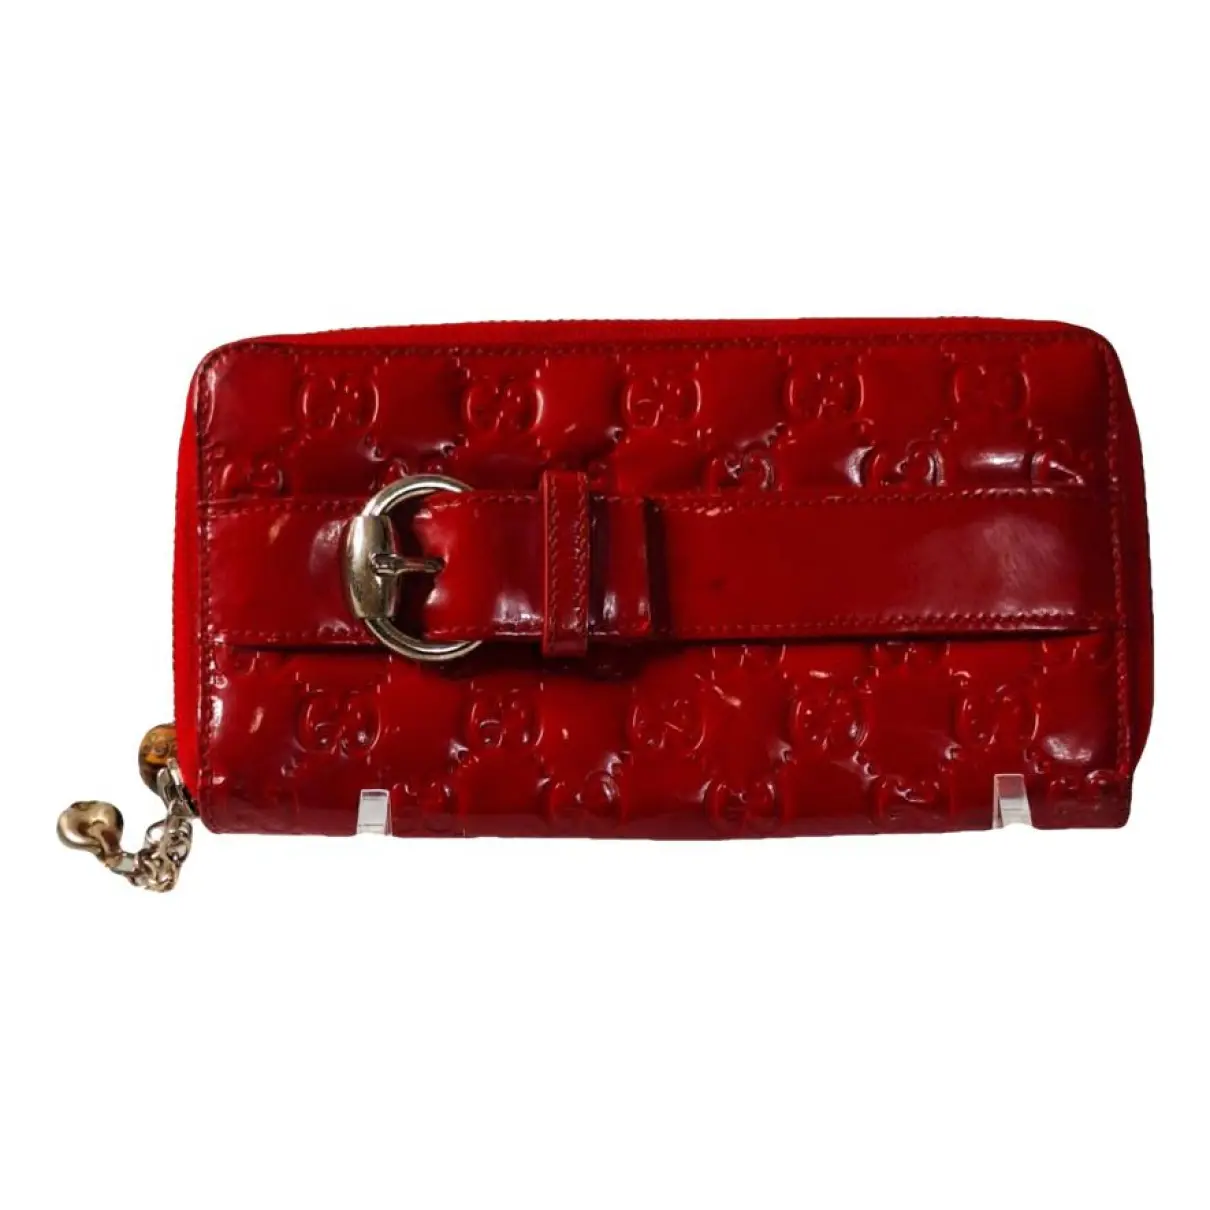 Continental patent leather wallet